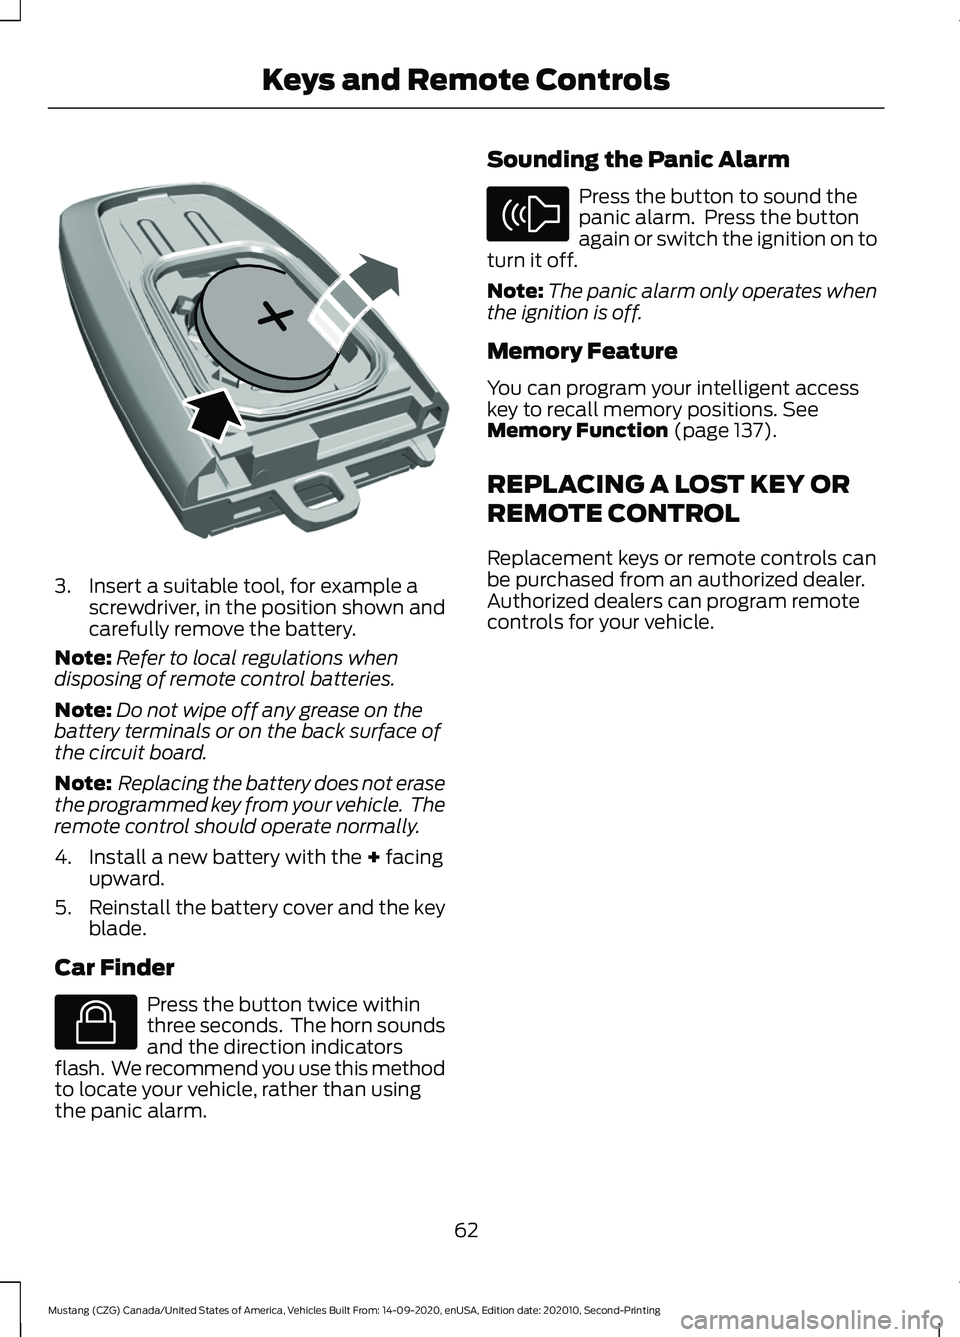 FORD MUSTANG 2021  Owners Manual 3. Insert a suitable tool, for example a
screwdriver, in the position shown and
carefully remove the battery.
Note: Refer to local regulations when
disposing of remote control batteries.
Note: Do not 